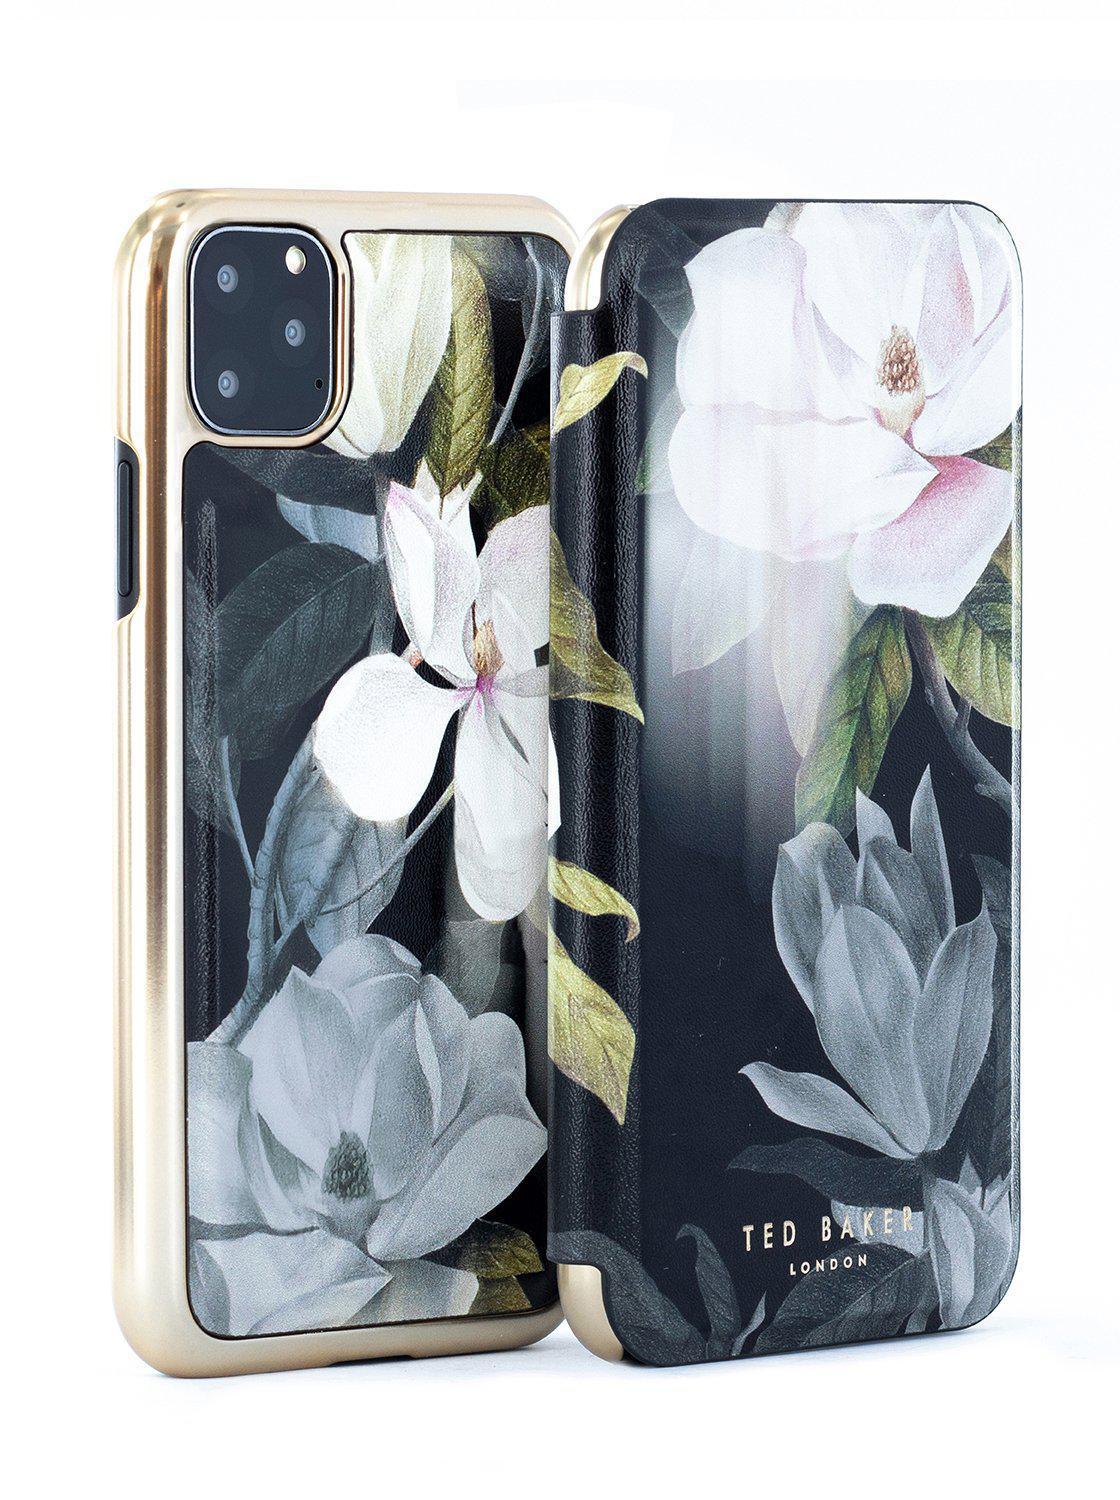 TED BAKER Opal Folio Case for iPhone 11 Pro